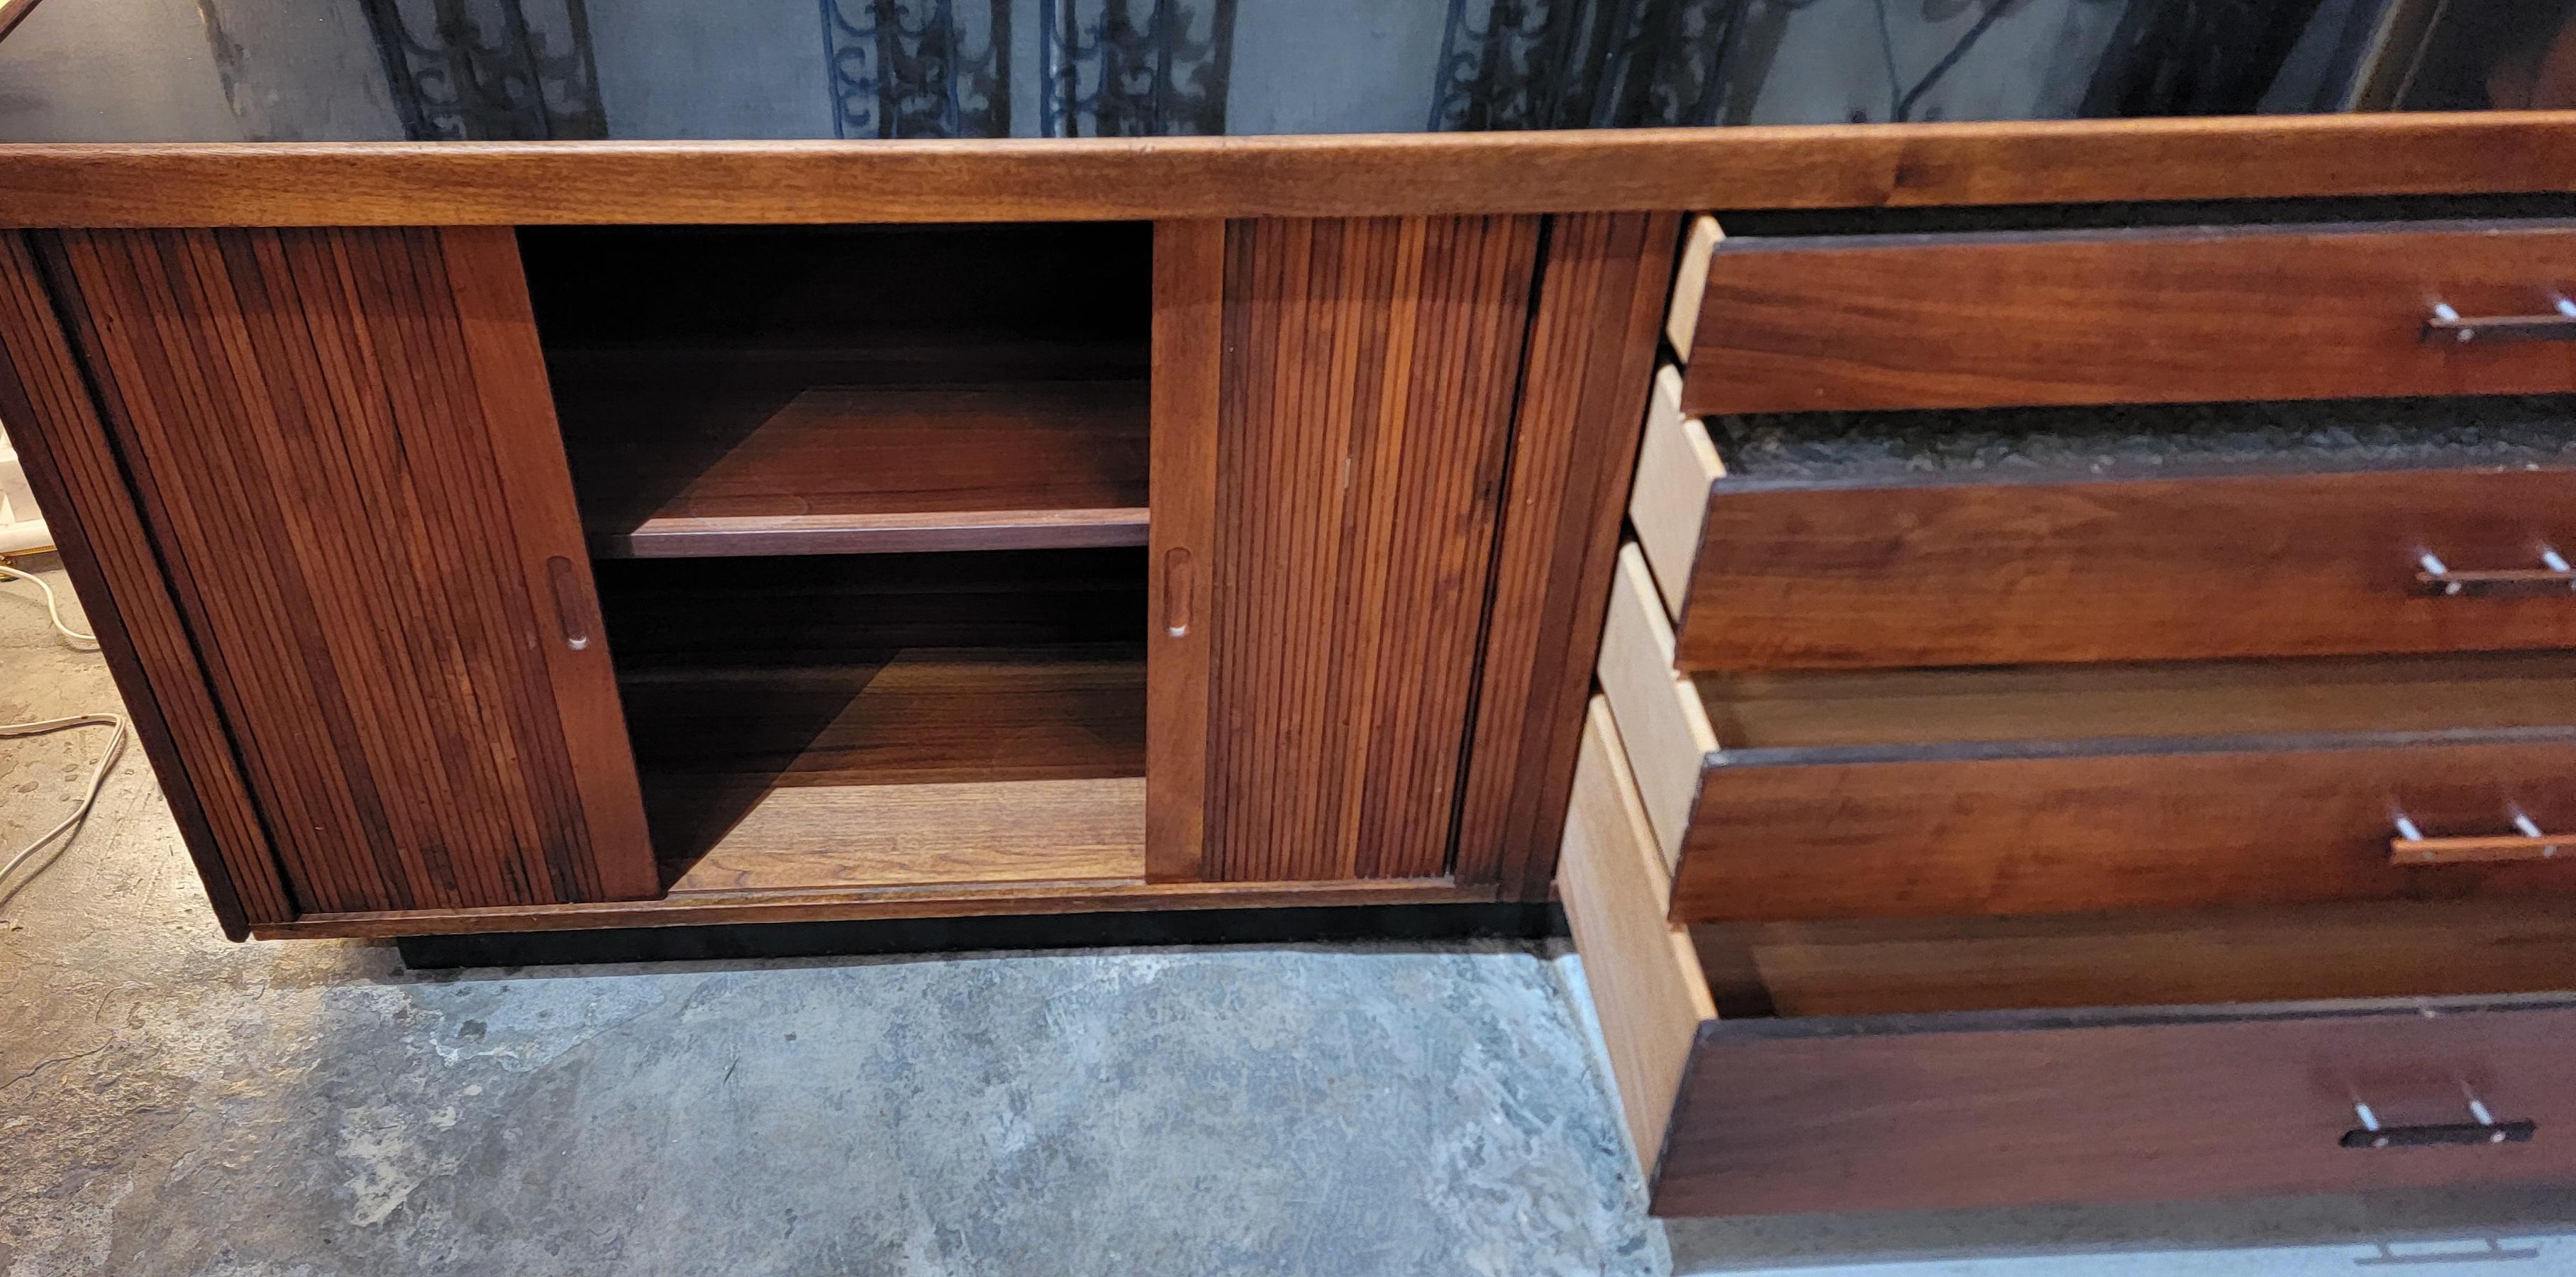 Tambour Door Credenza by Milo Baughman for Glenn of California For Sale 2